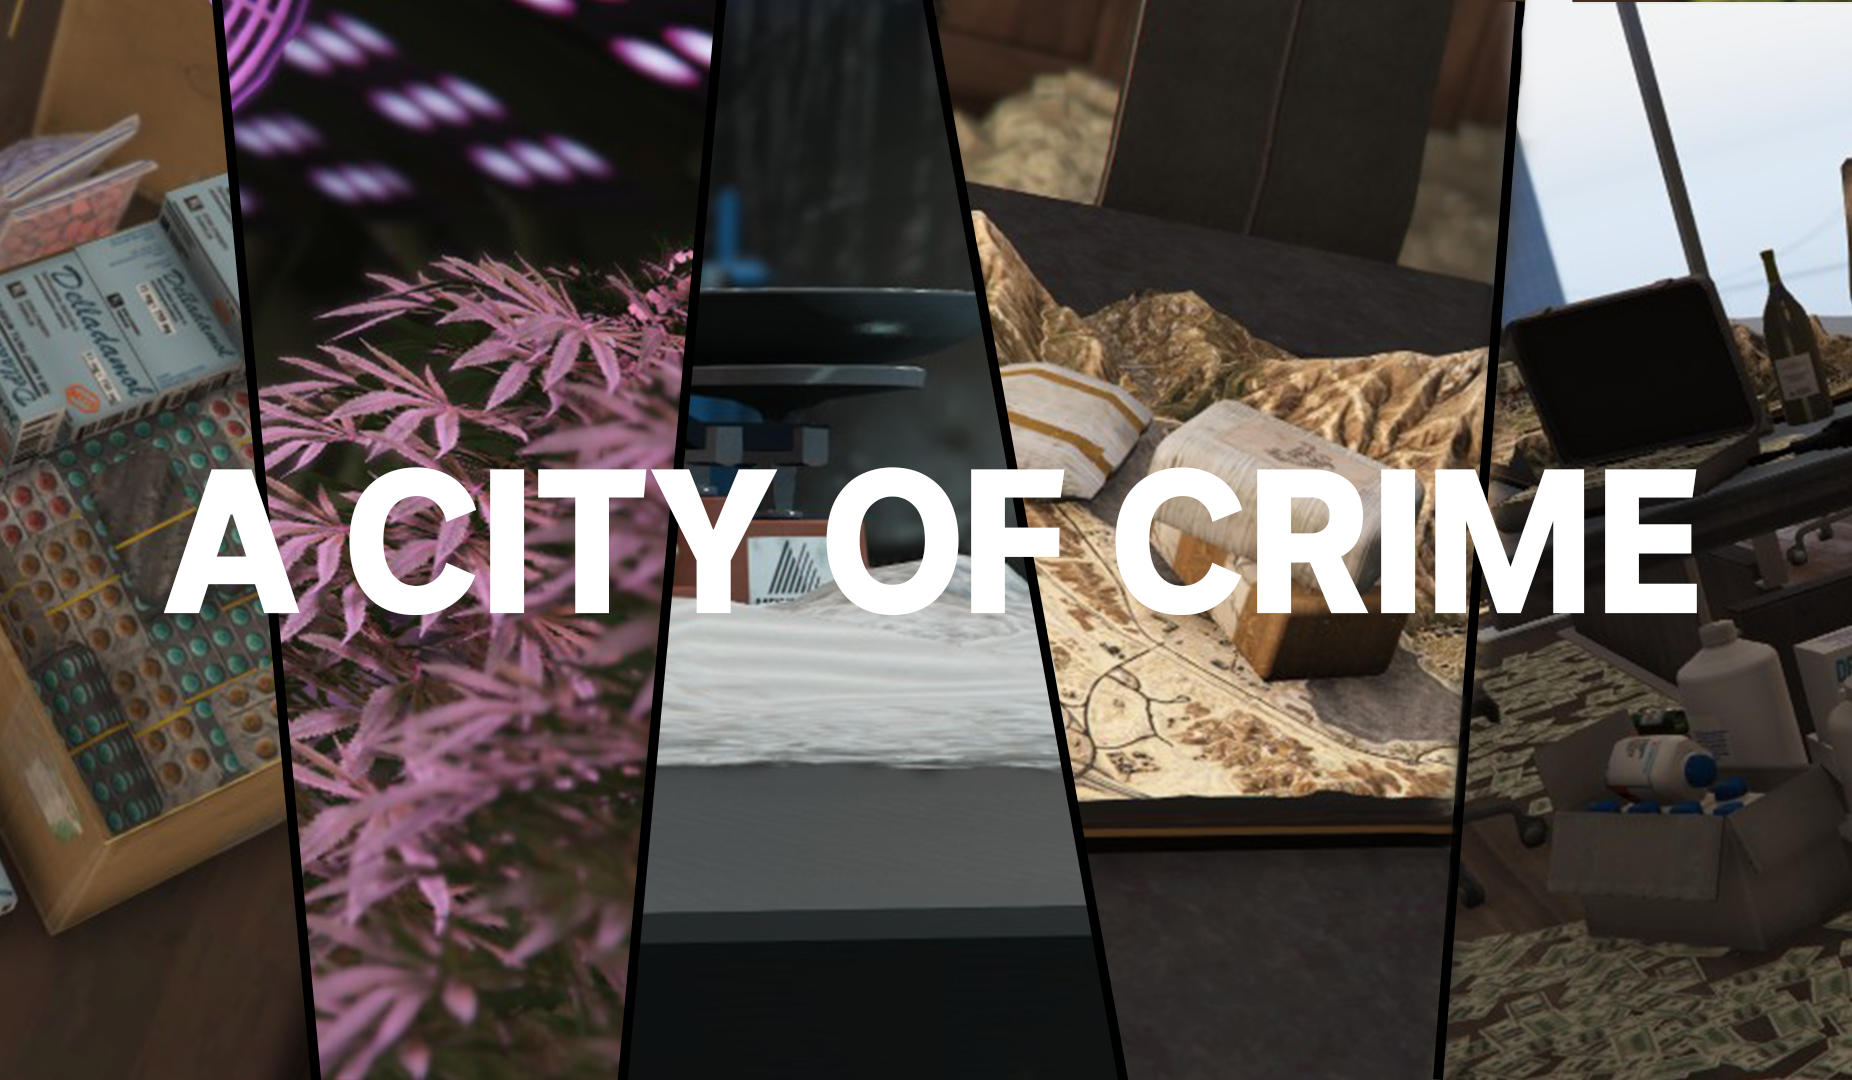 5 Stacked images and the title "A City of Crime"